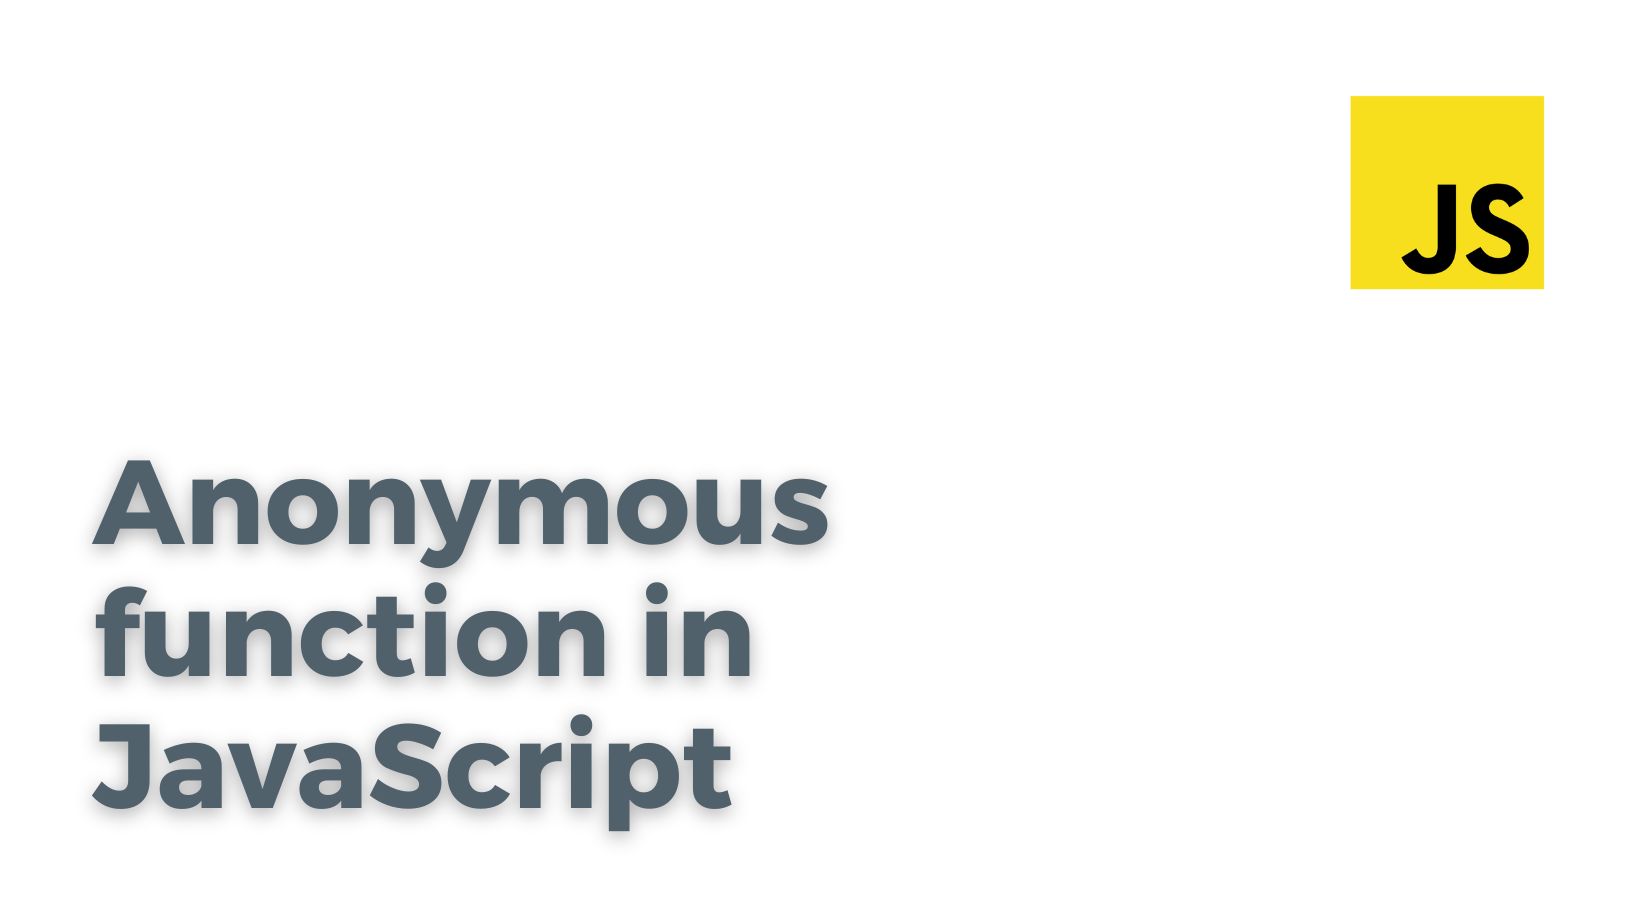 Anonymous function in JavaScript